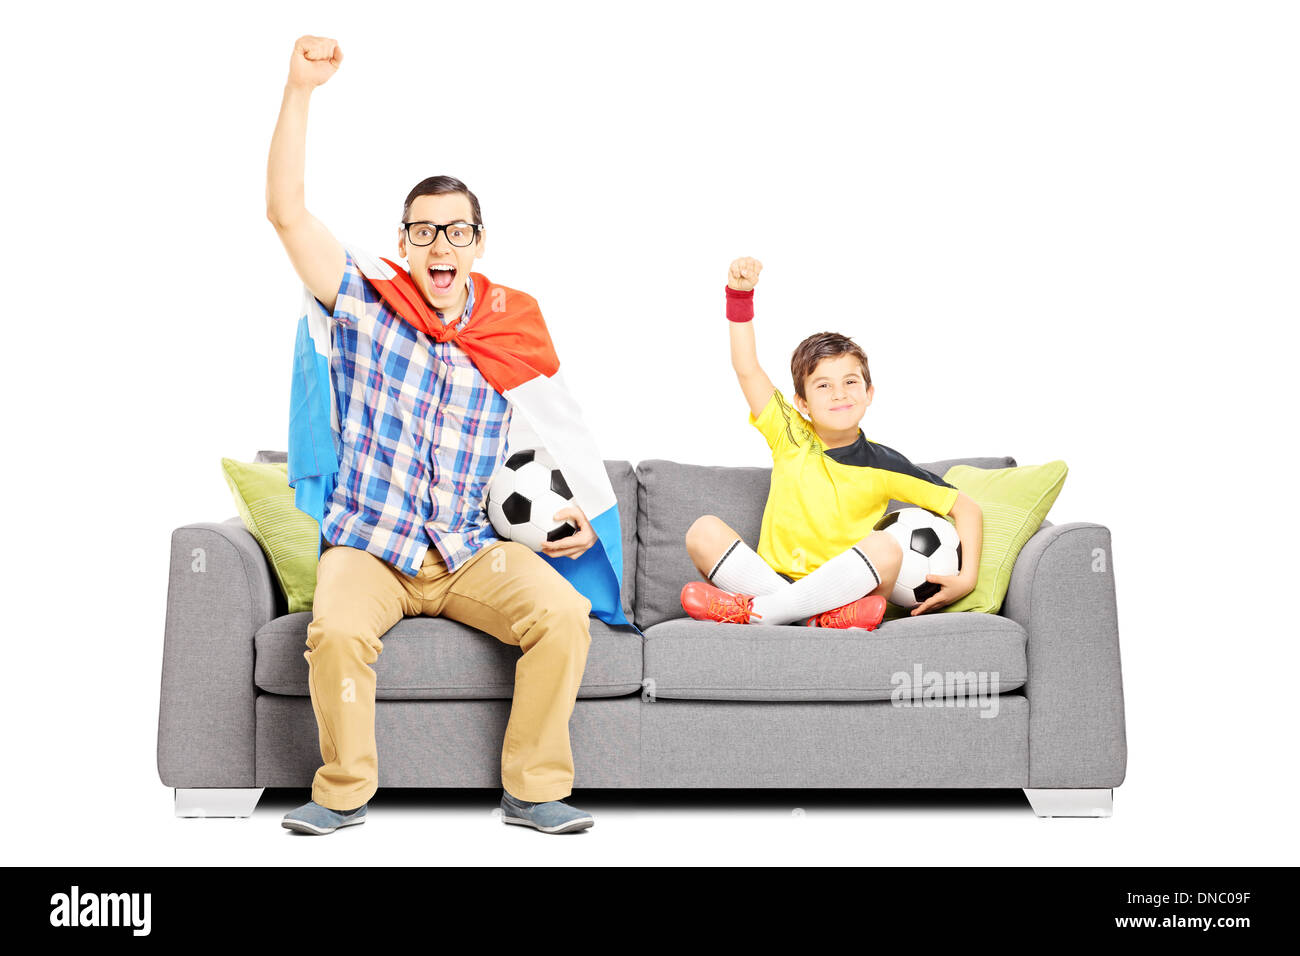 Two male sport fans seated on a sofa watching sport Stock Photo